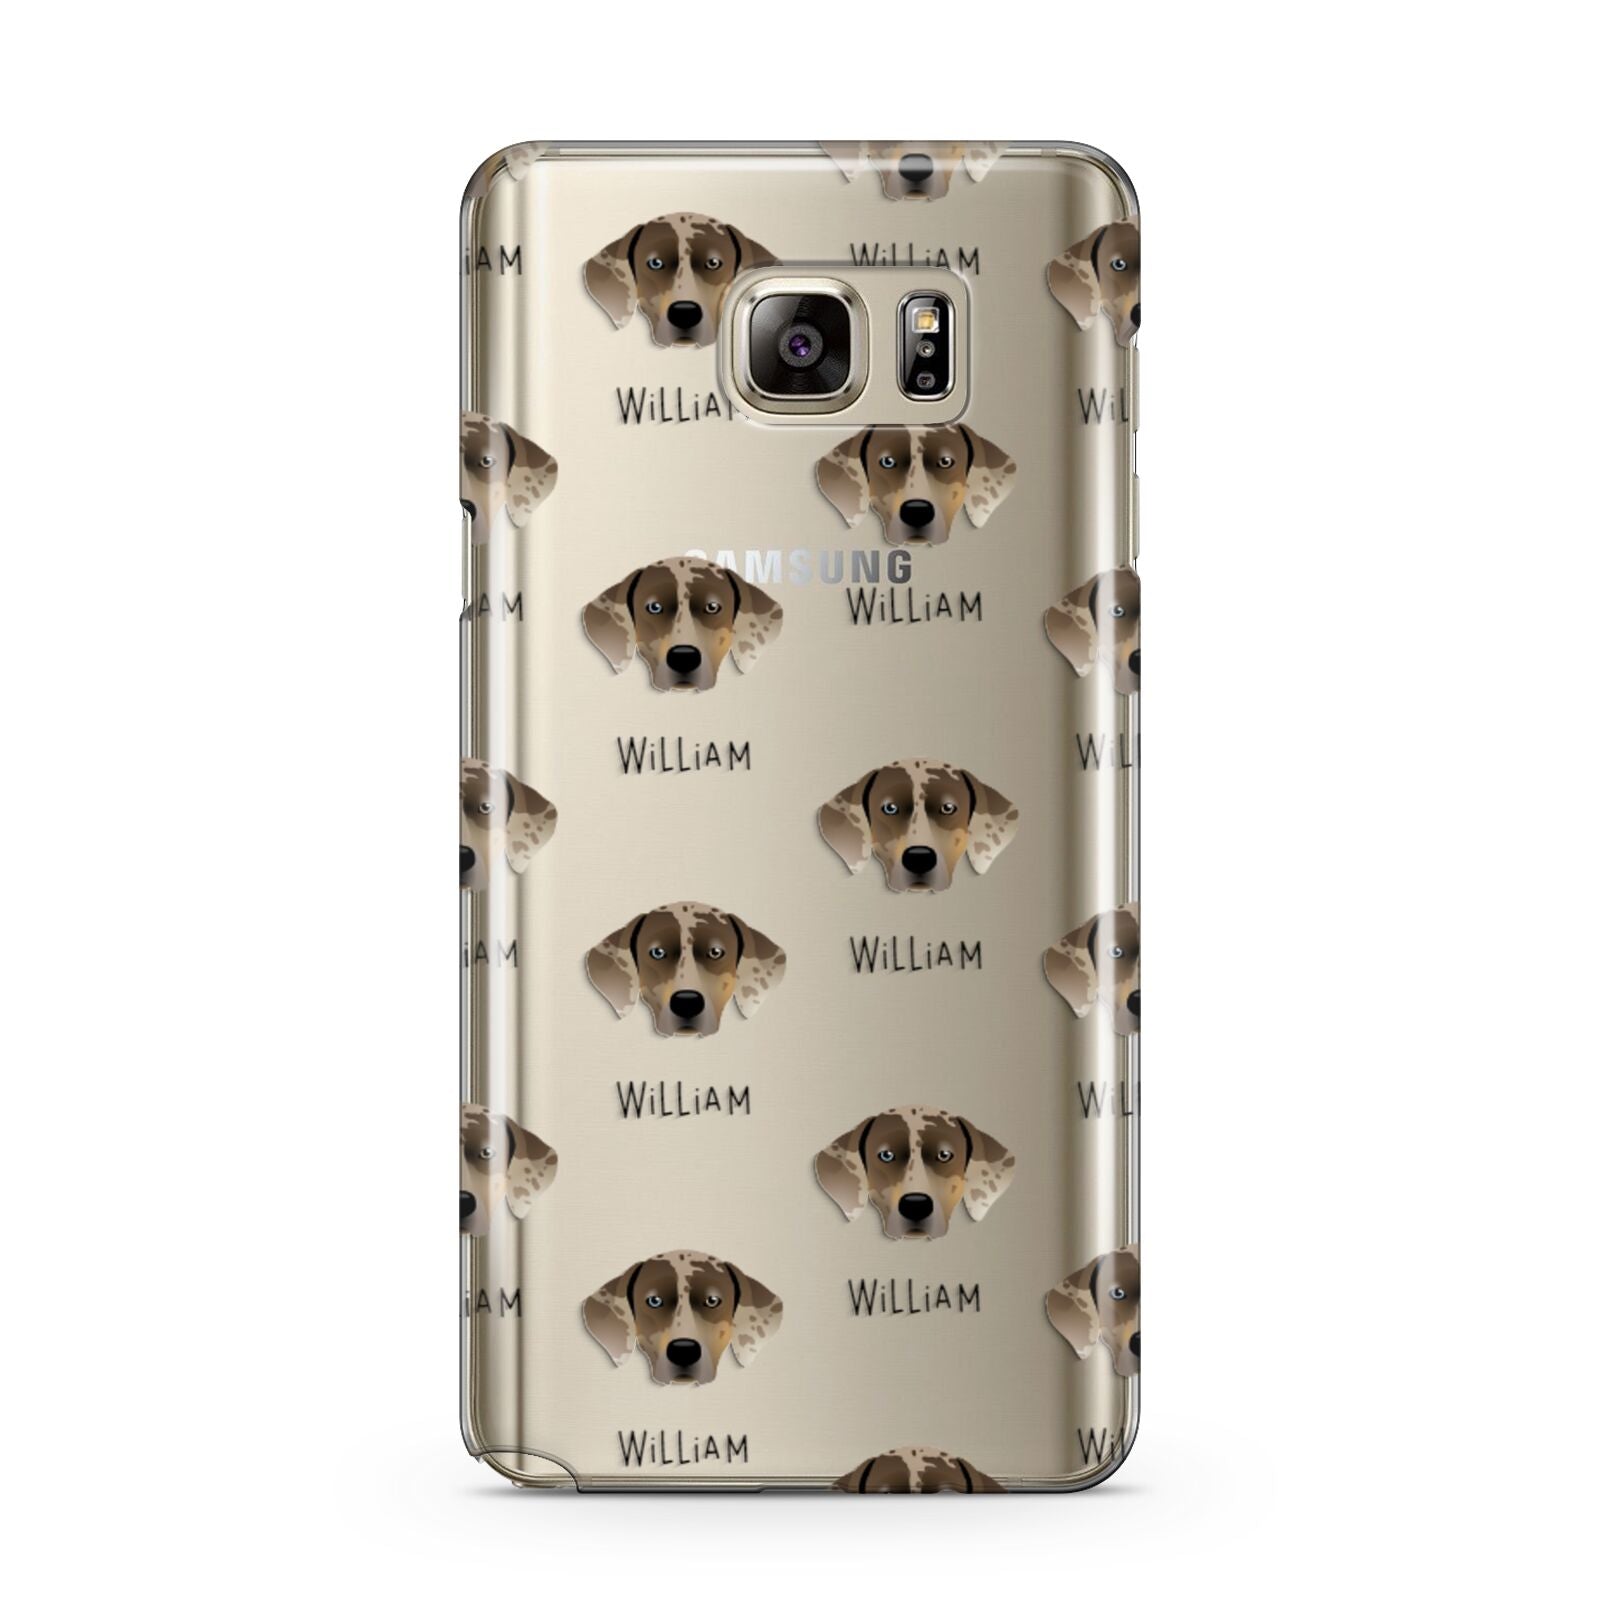 Catahoula Leopard Dog Icon with Name Samsung Galaxy Note 5 Case